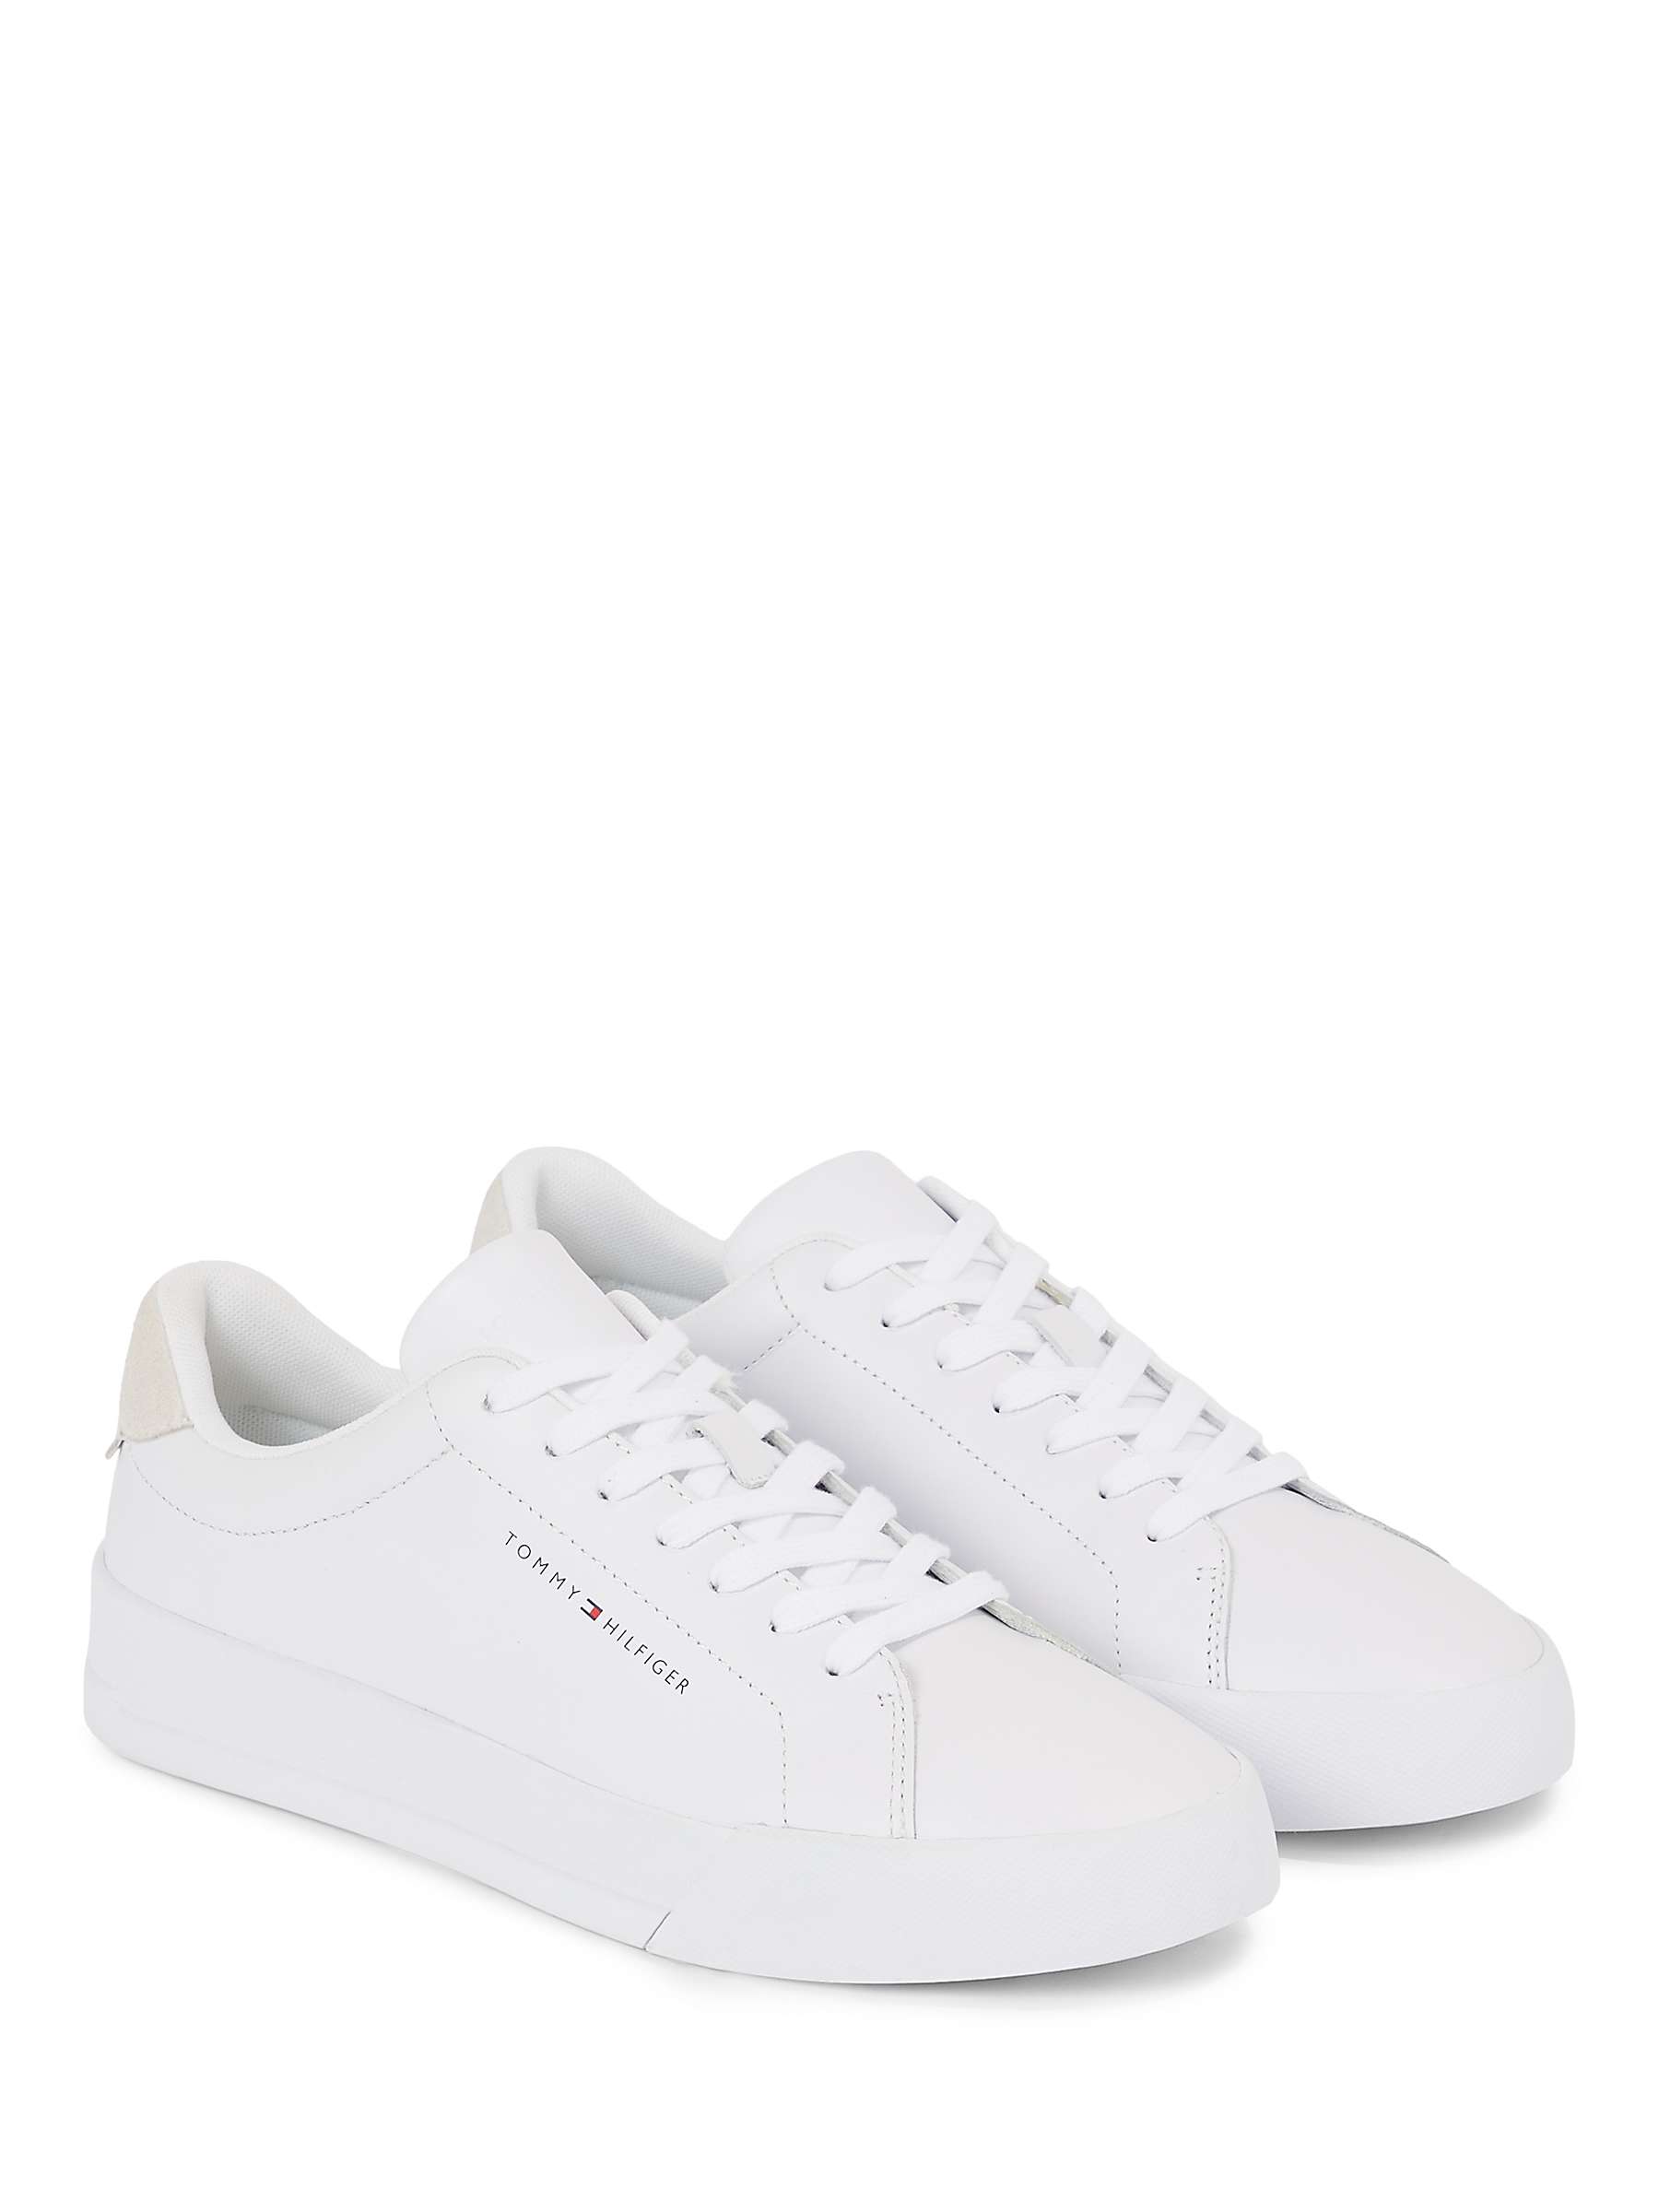 Buy Tommy Hilfiger Court Leather Trainers Online at johnlewis.com